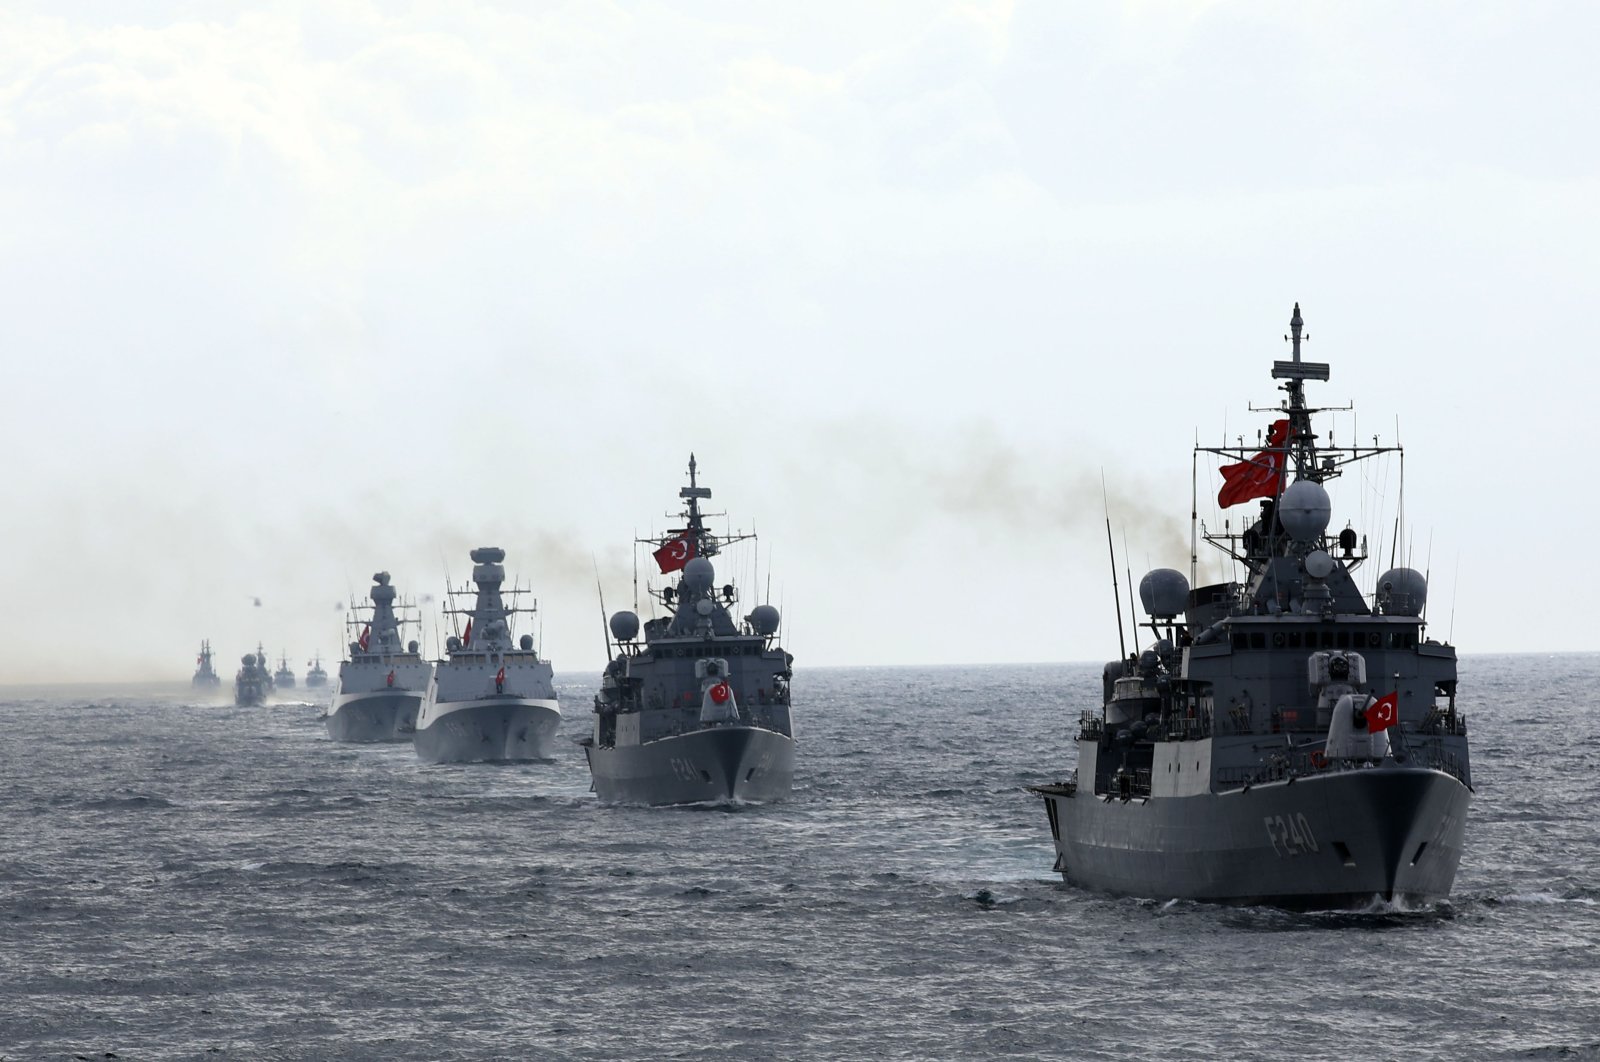 Turkish naval forces during the Blue Homeland 2021 tactical exercise, in the Aegean Sea, Turkey, March 6, 2021. (AA Photo)